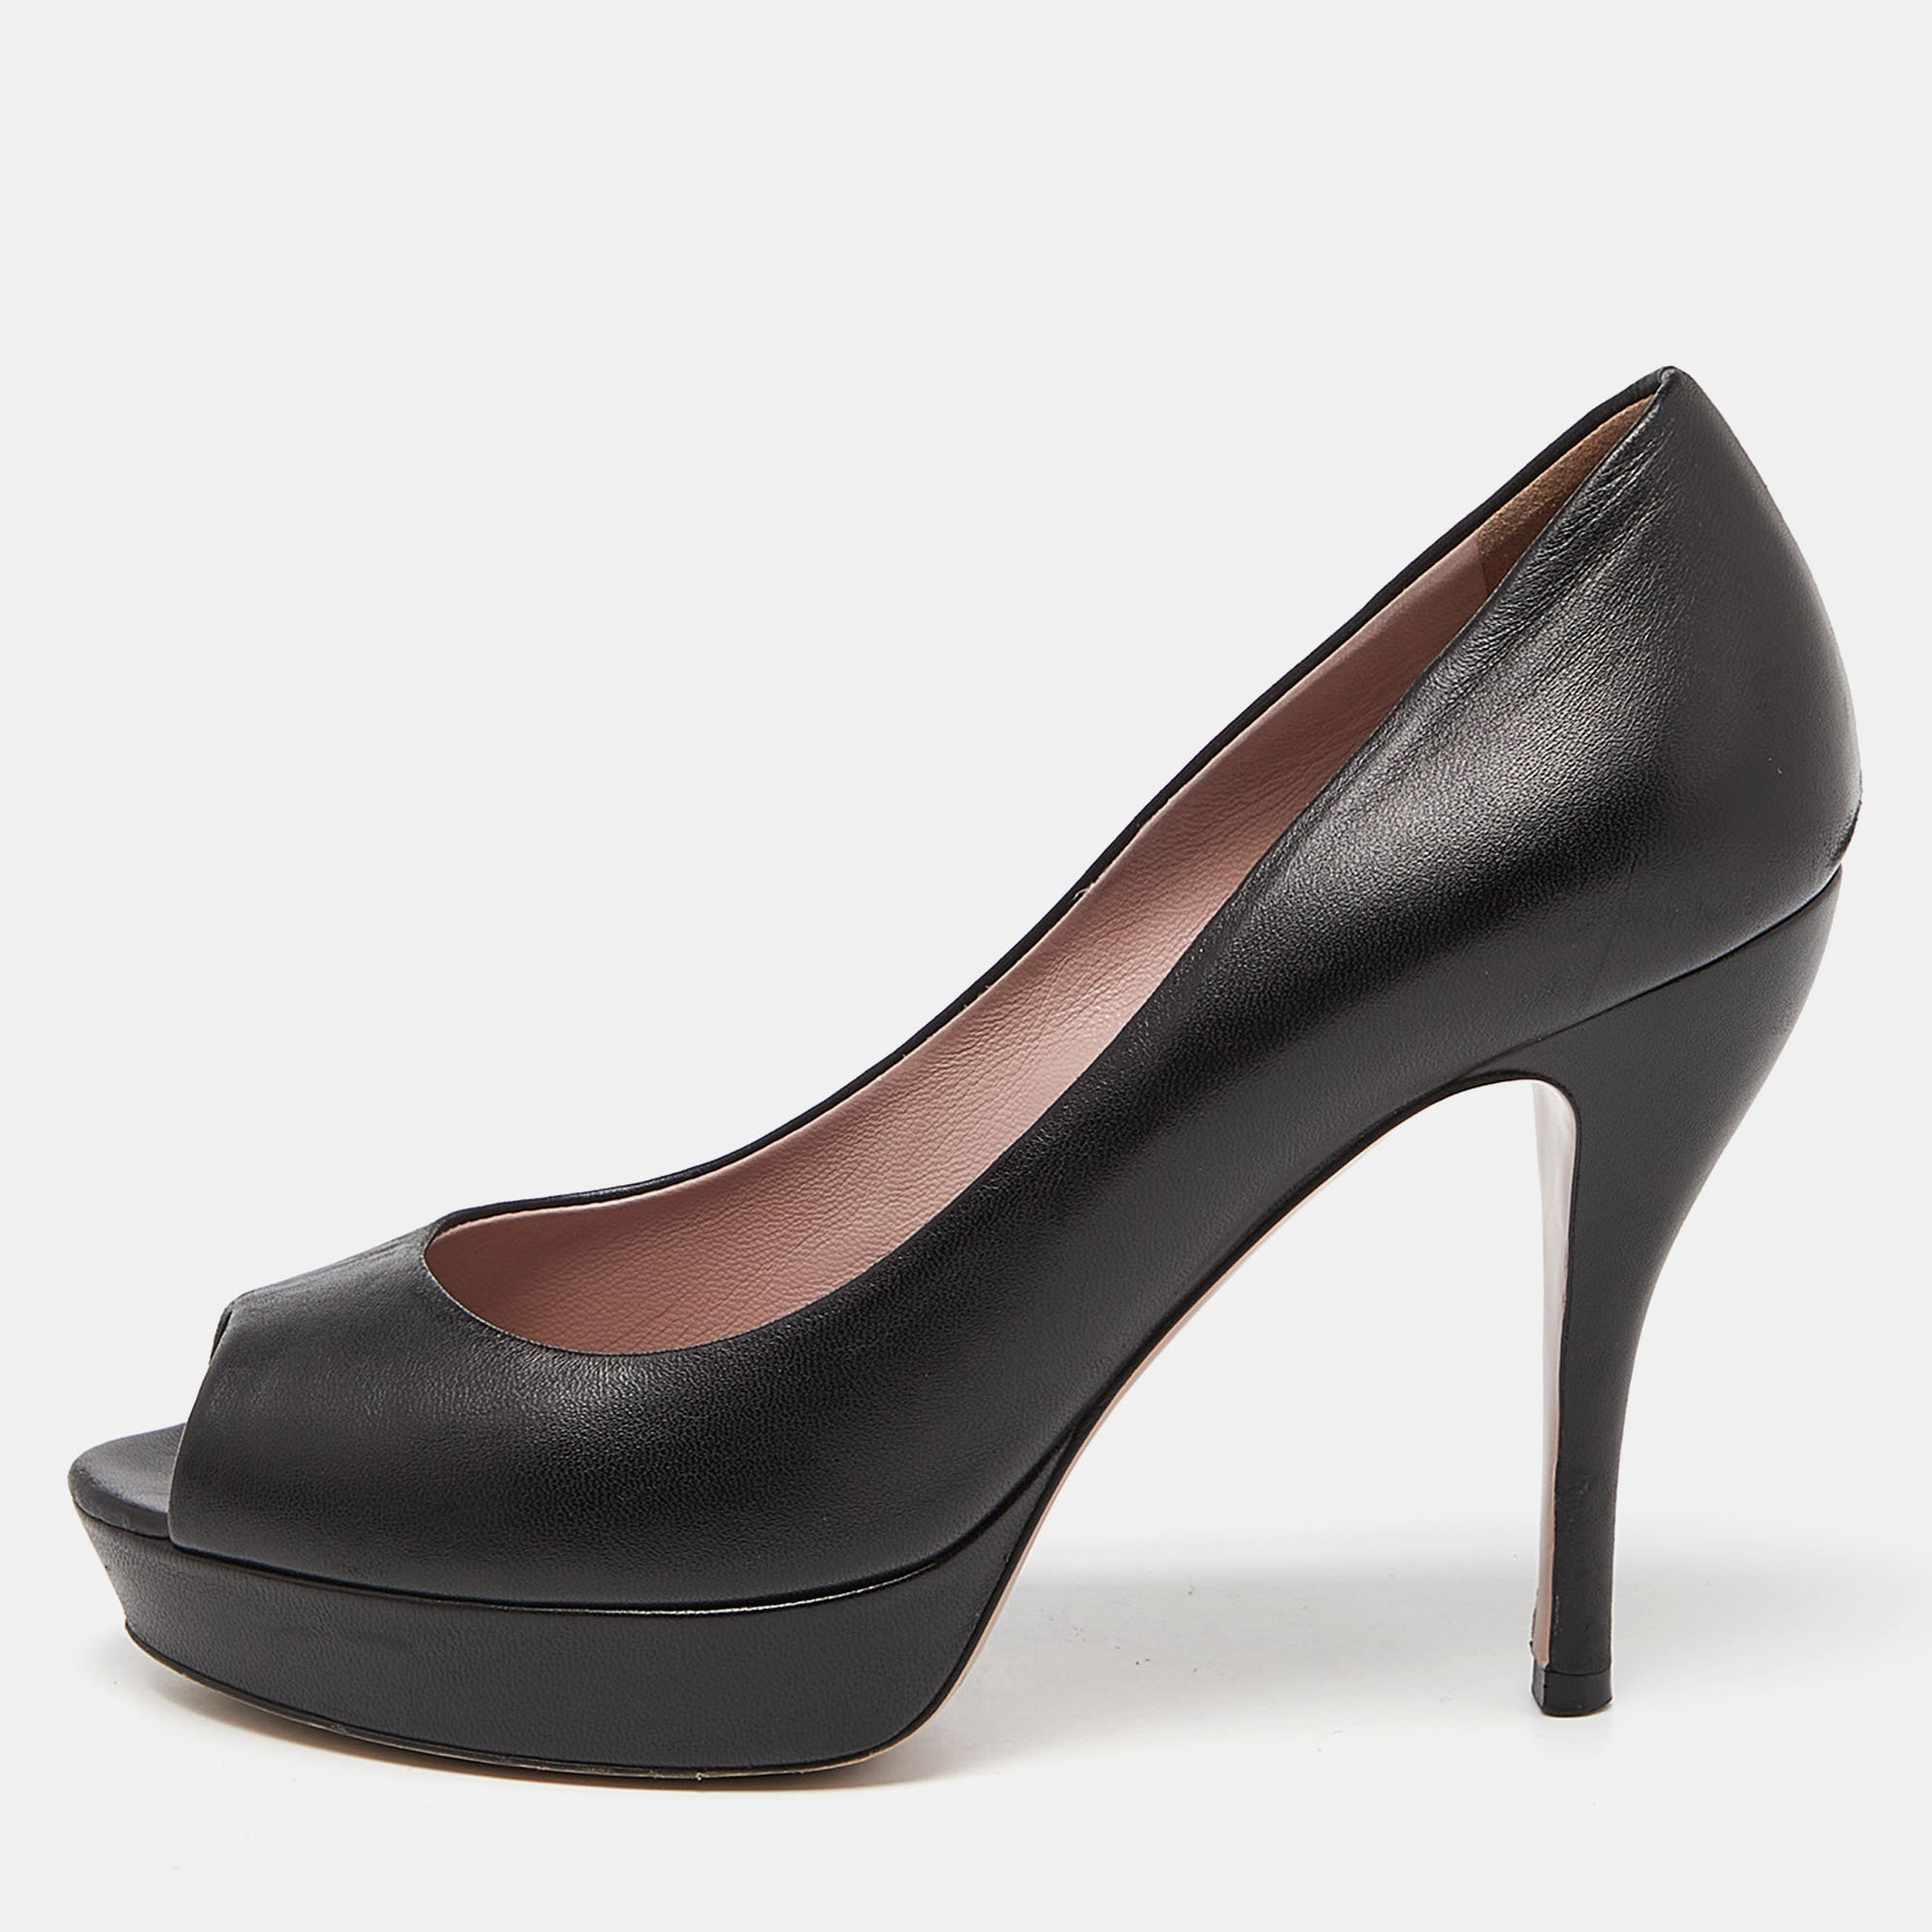 Exuding femininity and elegance these pumps feature a chic silhouette with an attractive design. You can wear these pumps for a stylish look.